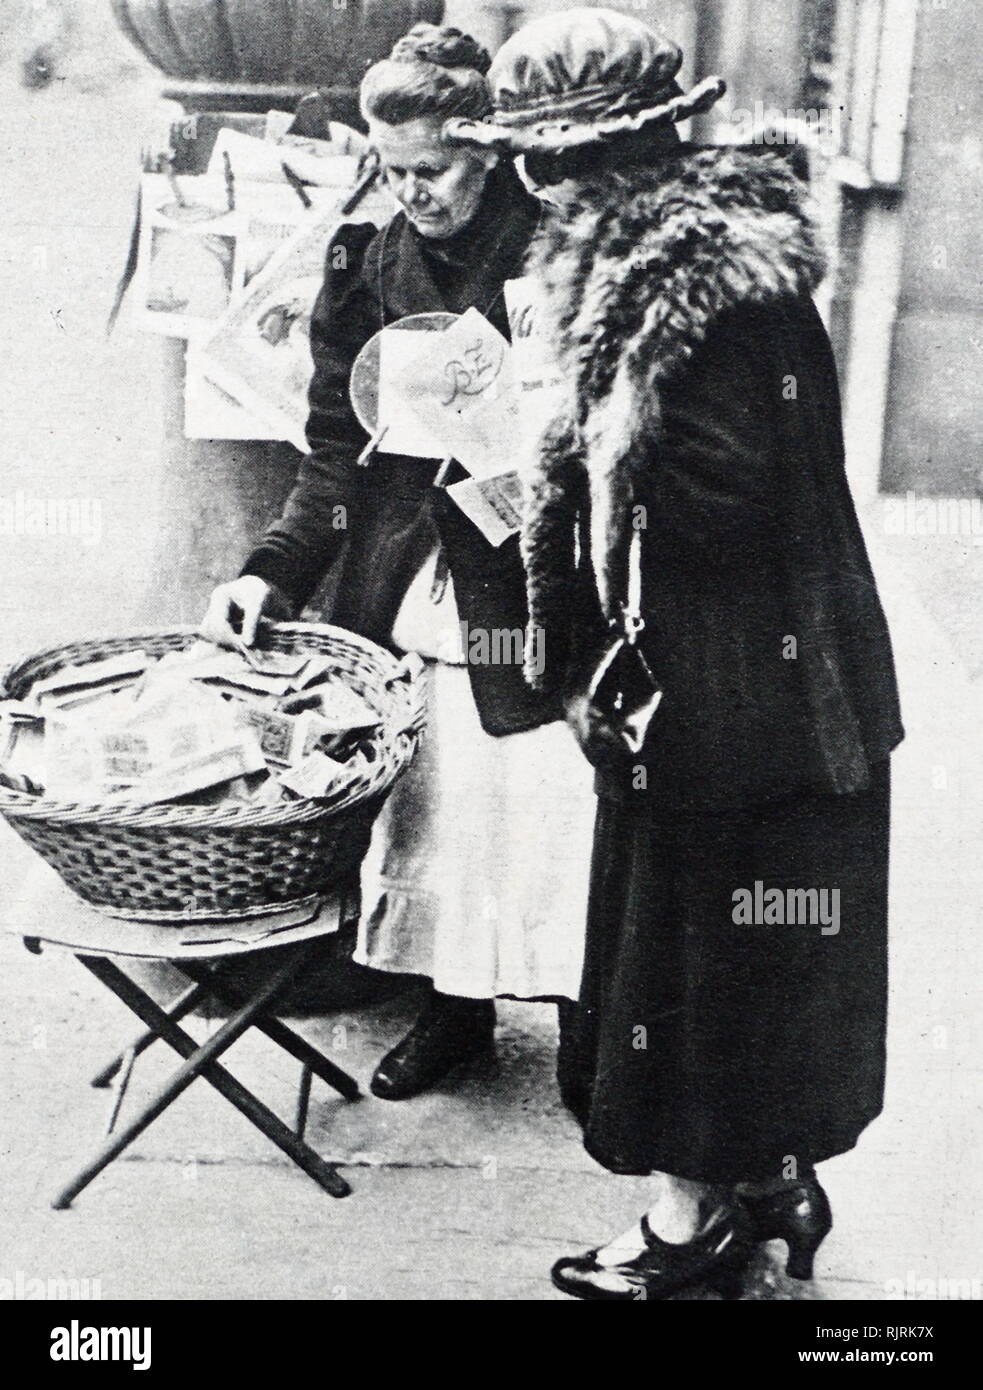 Basket full of banknotes during hyperinflation era in Weimar Germany 1923.  By November 1922, the value in gold of money in circulation had fallen from  £300 million before World War One, to £